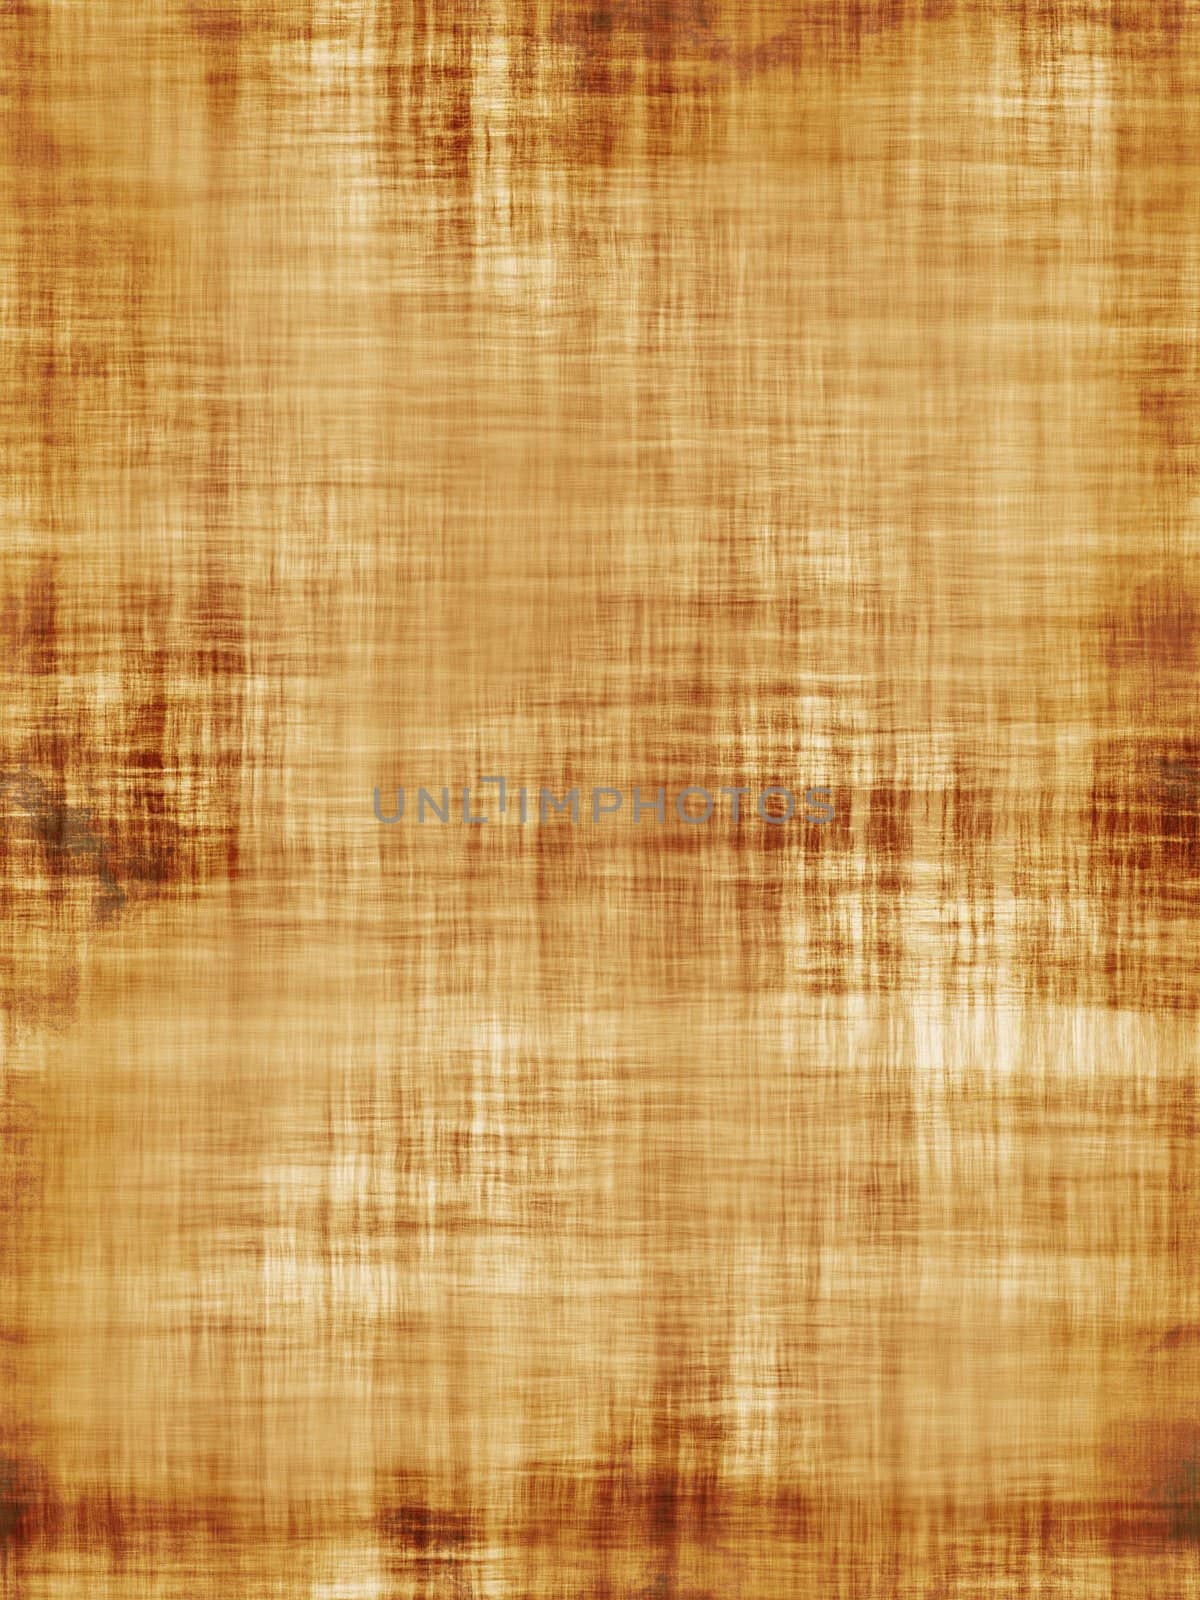 Some really old parchment paper - makes a great grungy background for your grungiest of grungy designs.  Simply tweak the hue and saturation for a different effect!